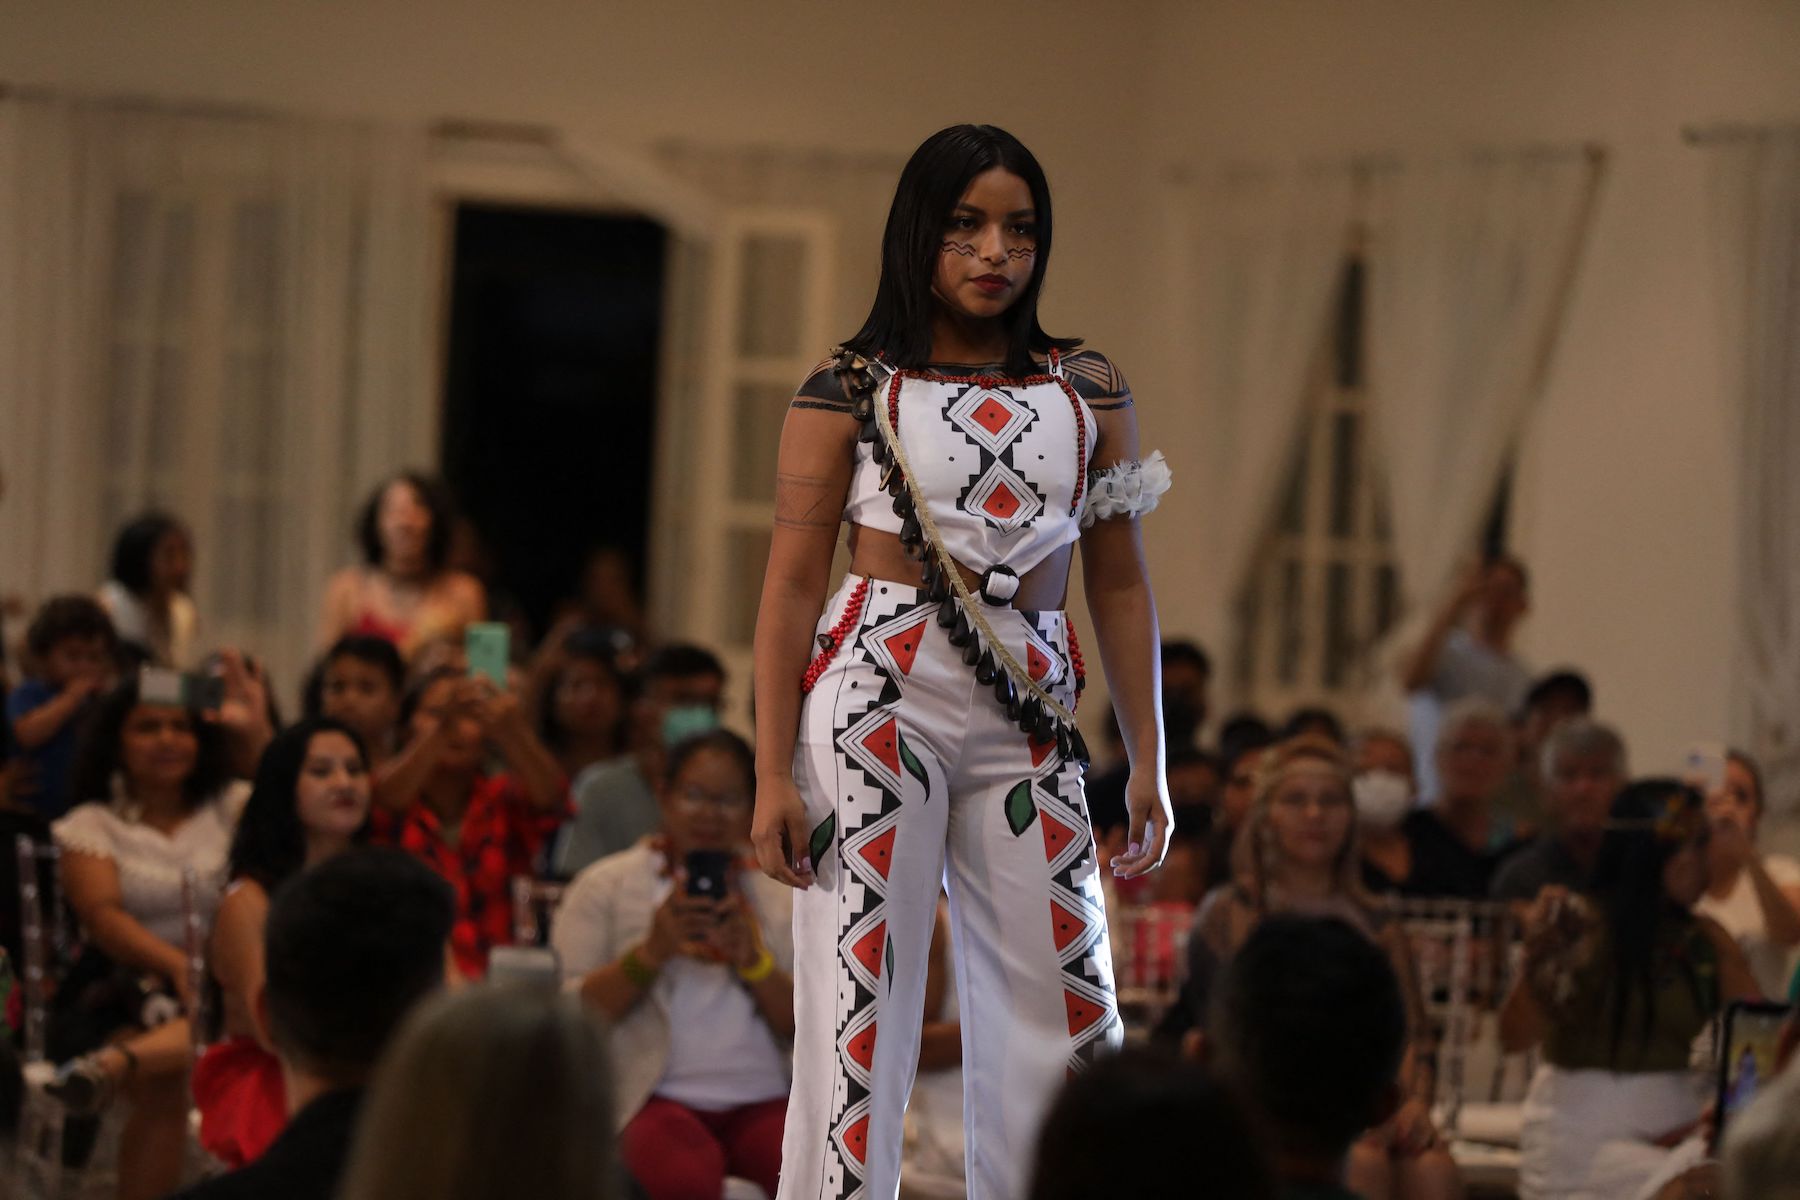 A Brazil's Indigenous model walking the catwalk to show off their unique design